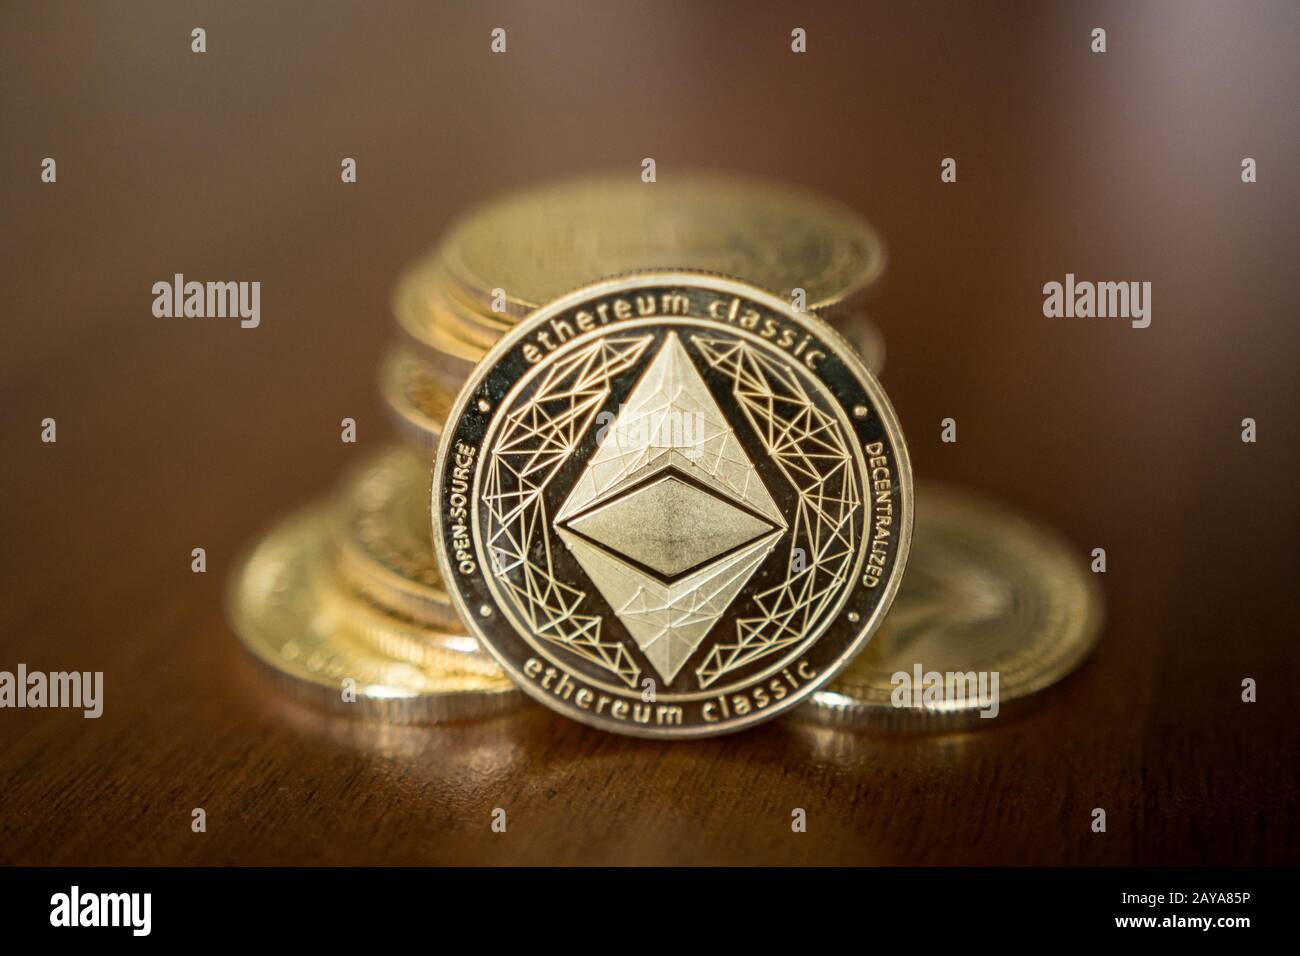 Golden Etherium coin close up. Ether is a cryptocurrency whose blockchain is generated by the Ethereum platform. Stock Photo